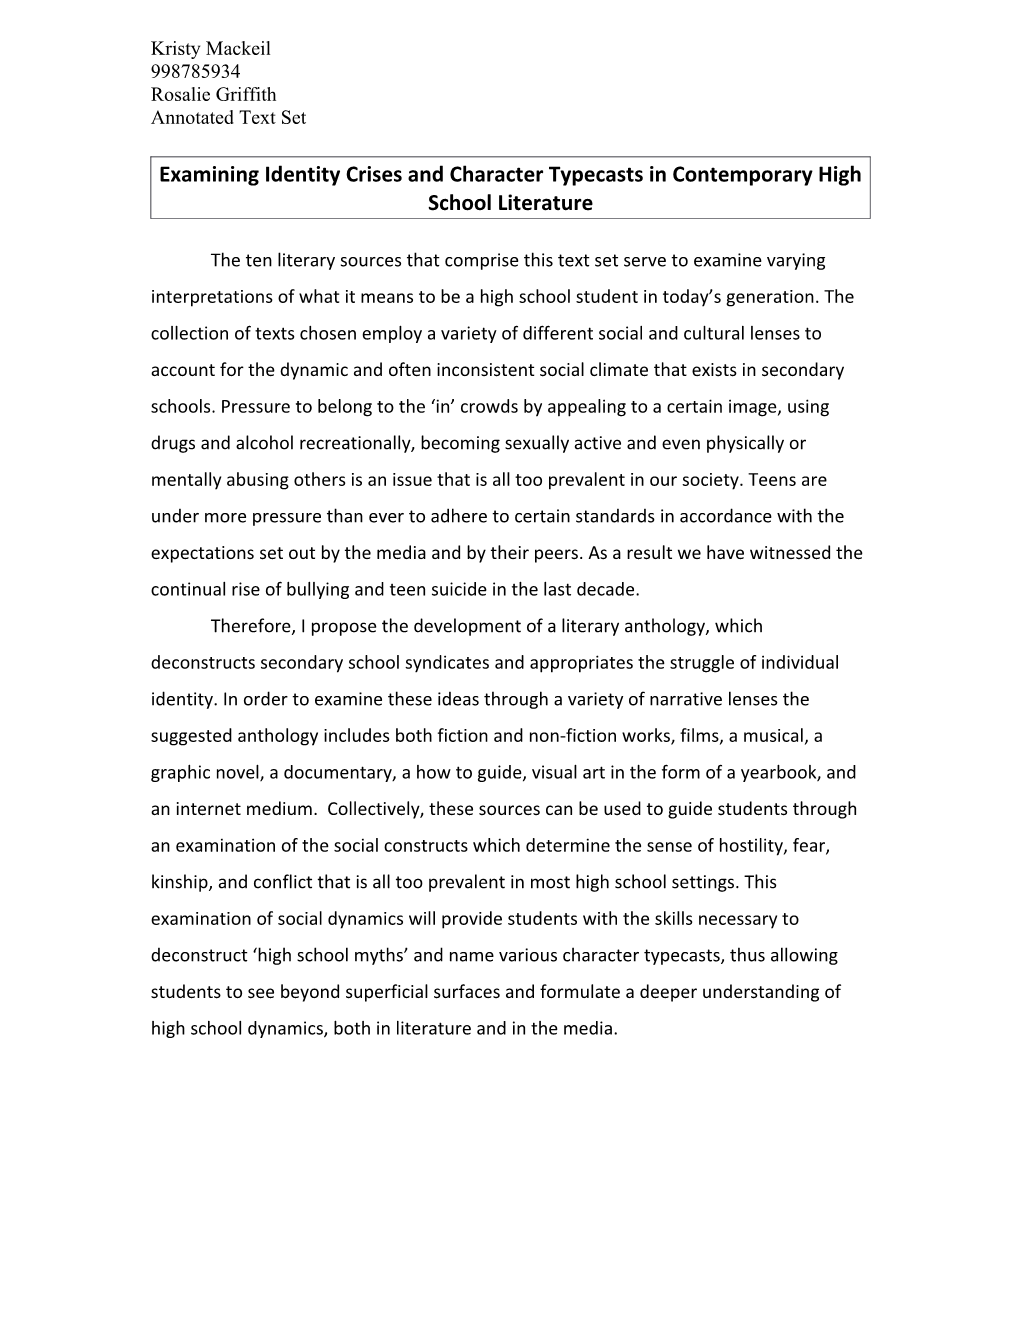 Examining Identity Crises and Character Typecasts in Contemporary High School Literature